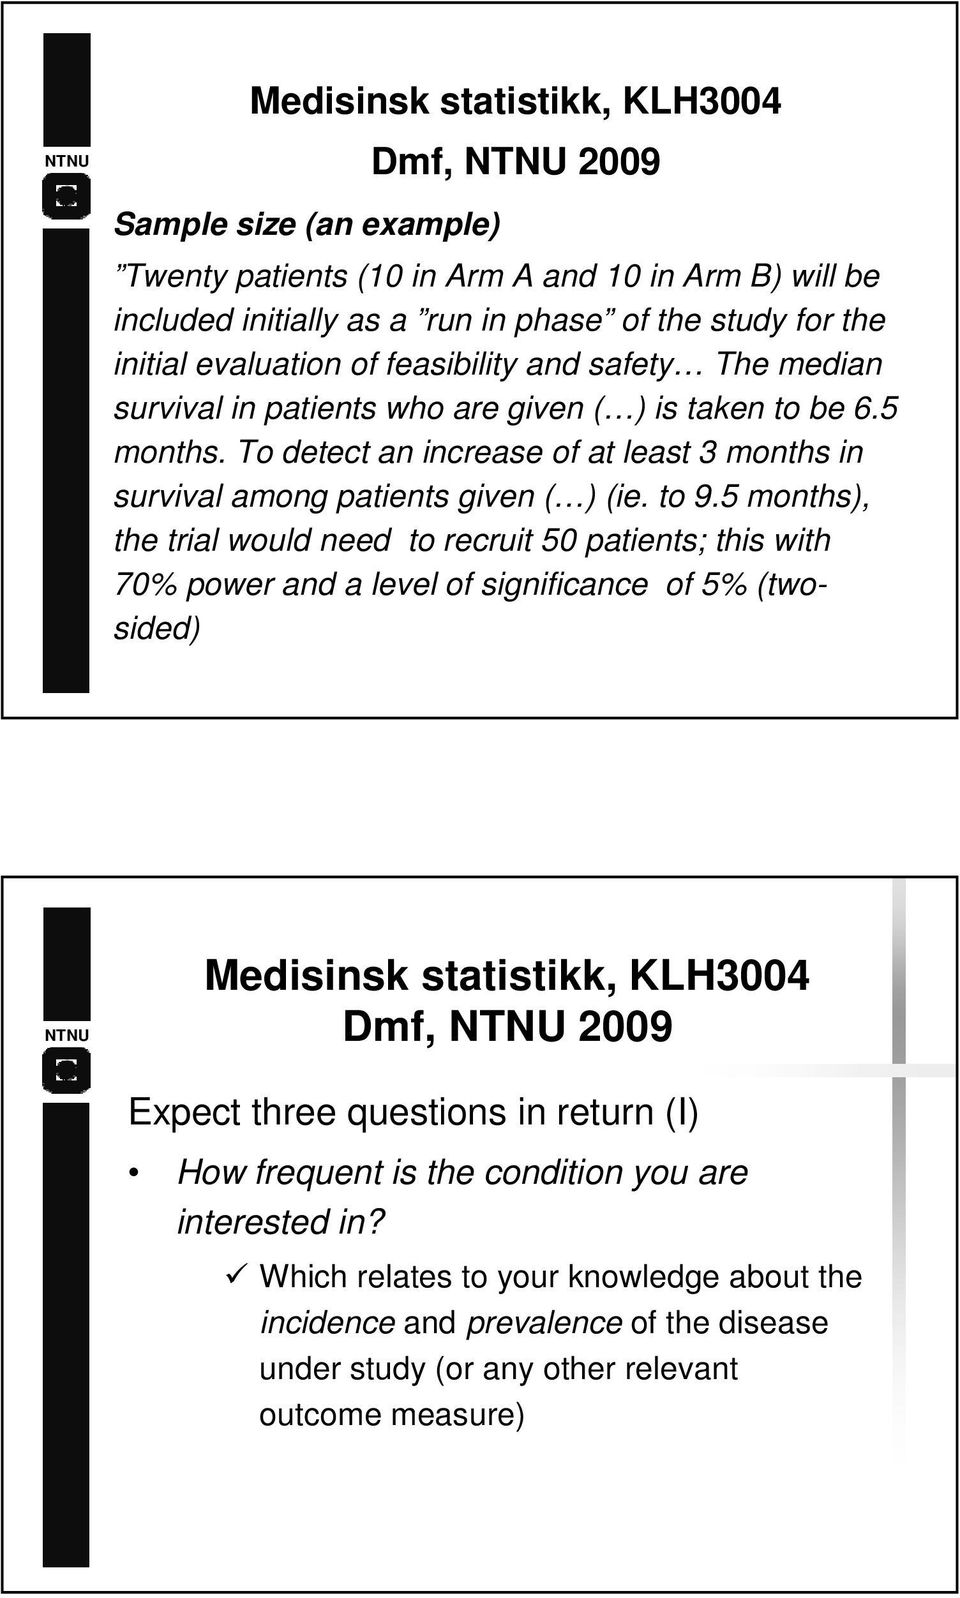 to 9.5 months), the trial would need to recruit 50 patients; this with 70% power and a level of significance of 5% (twosided) Expect three questions in return (I) How